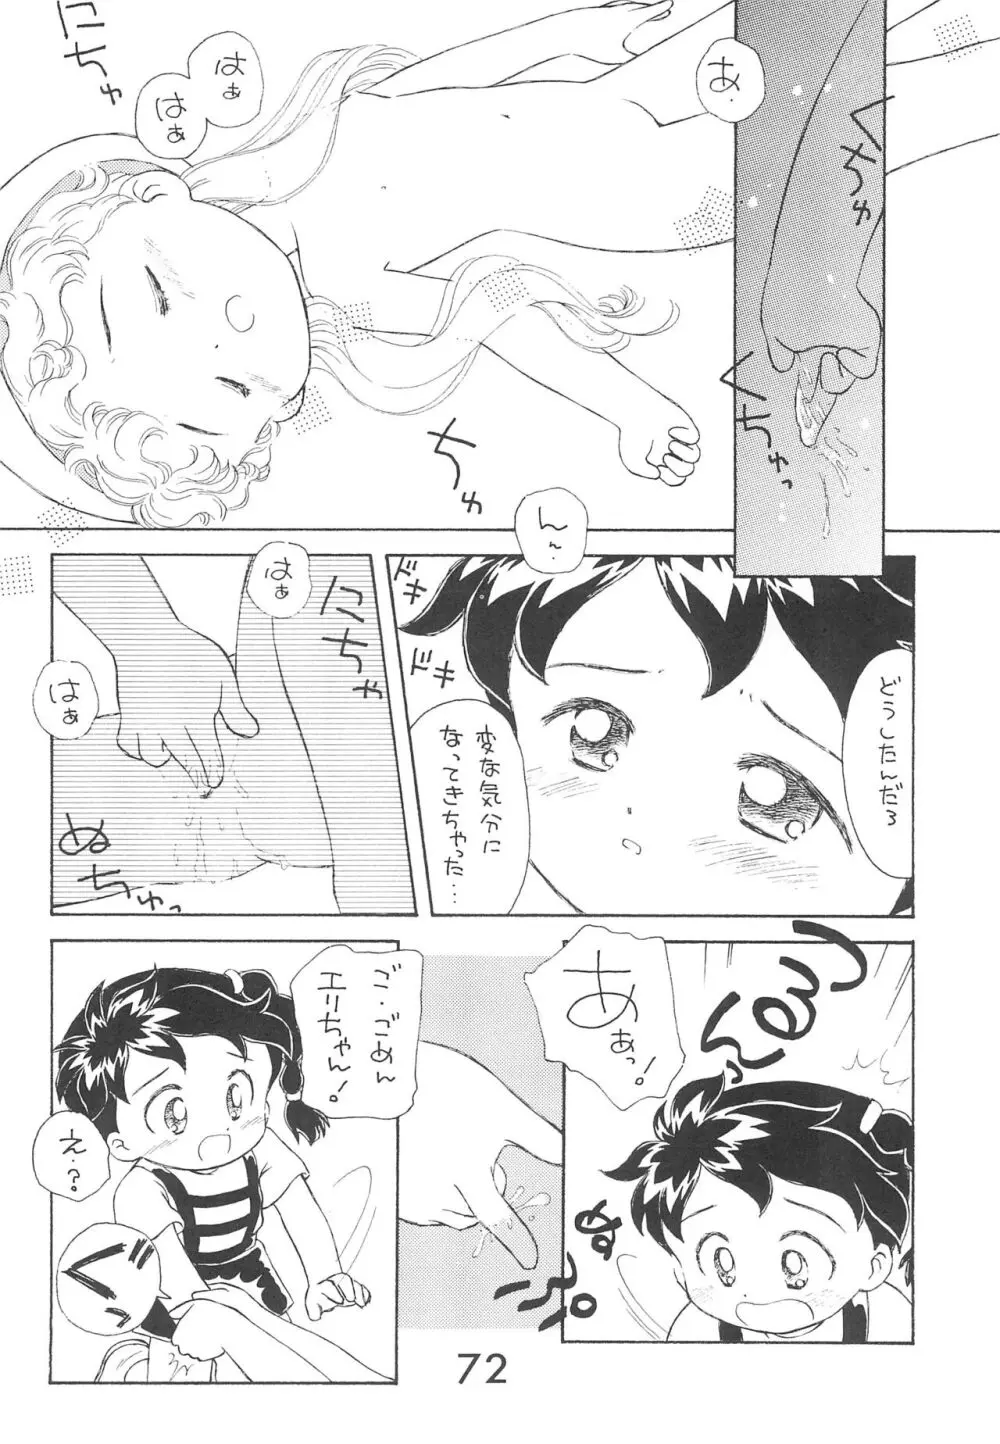 Fun House 9th Chame! - page72